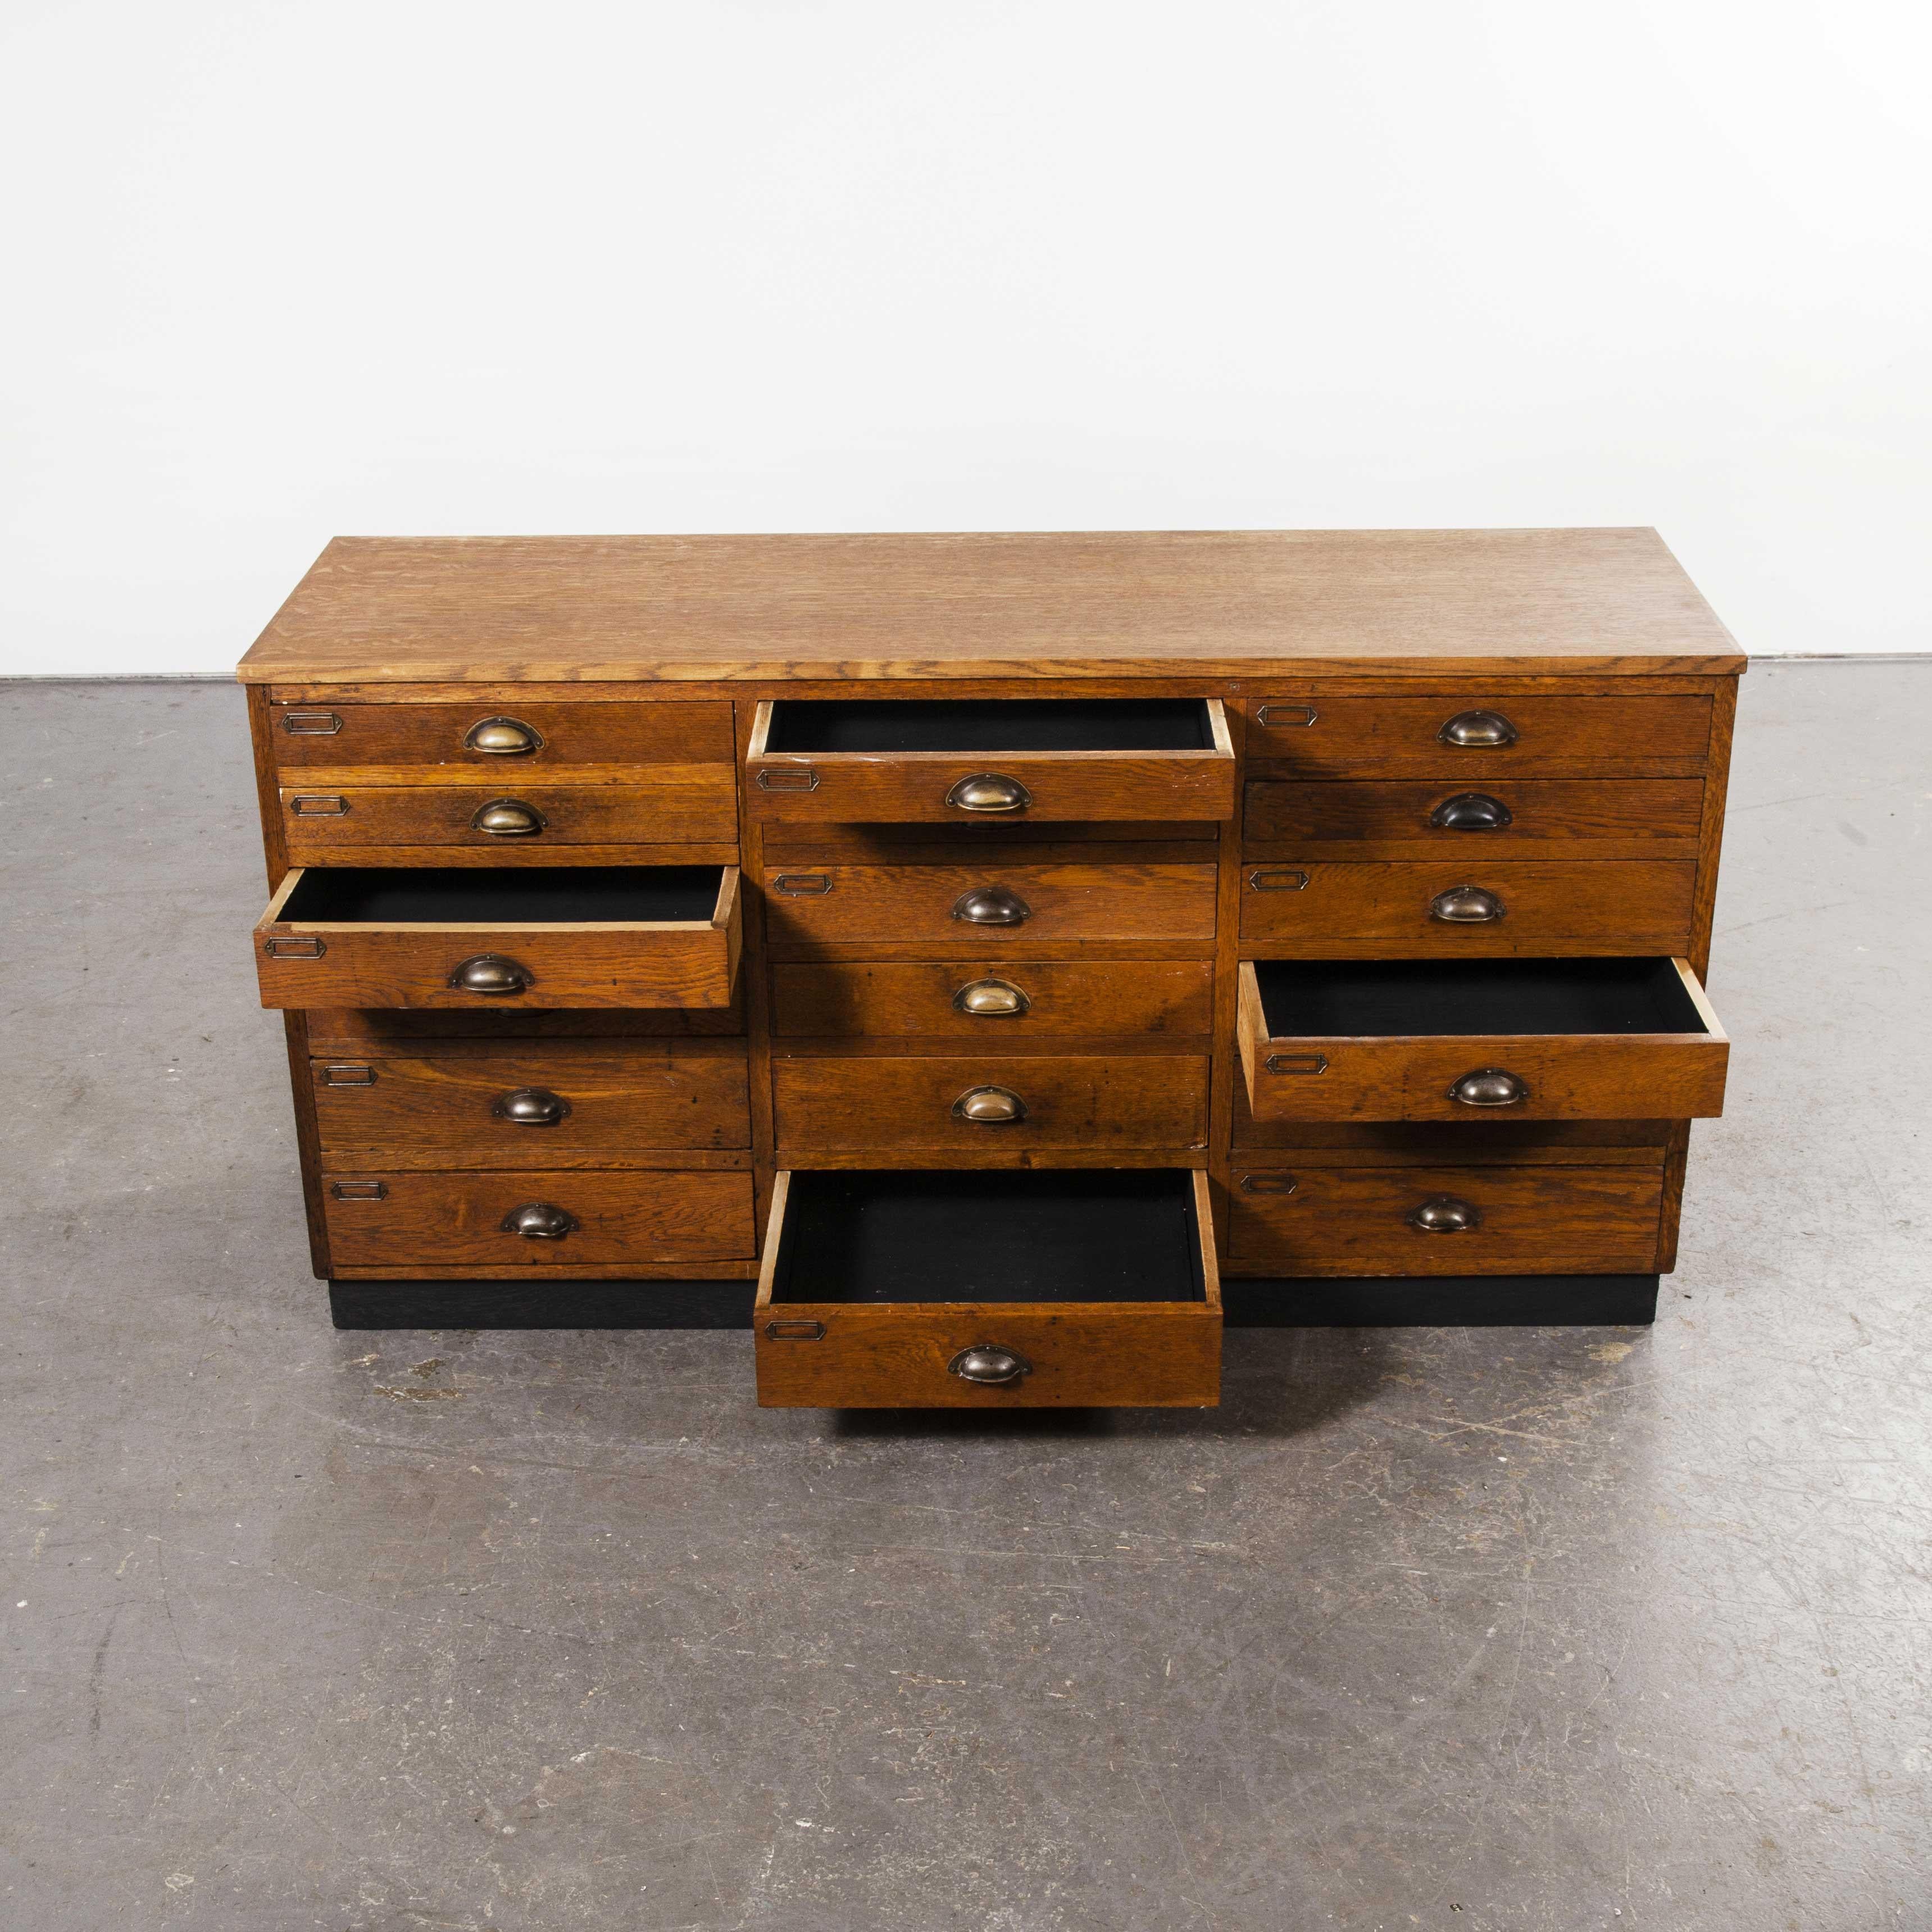 1940s Oak Low Multidrawer Apothercary Chest of Drawers, Eighteen Drawers 3